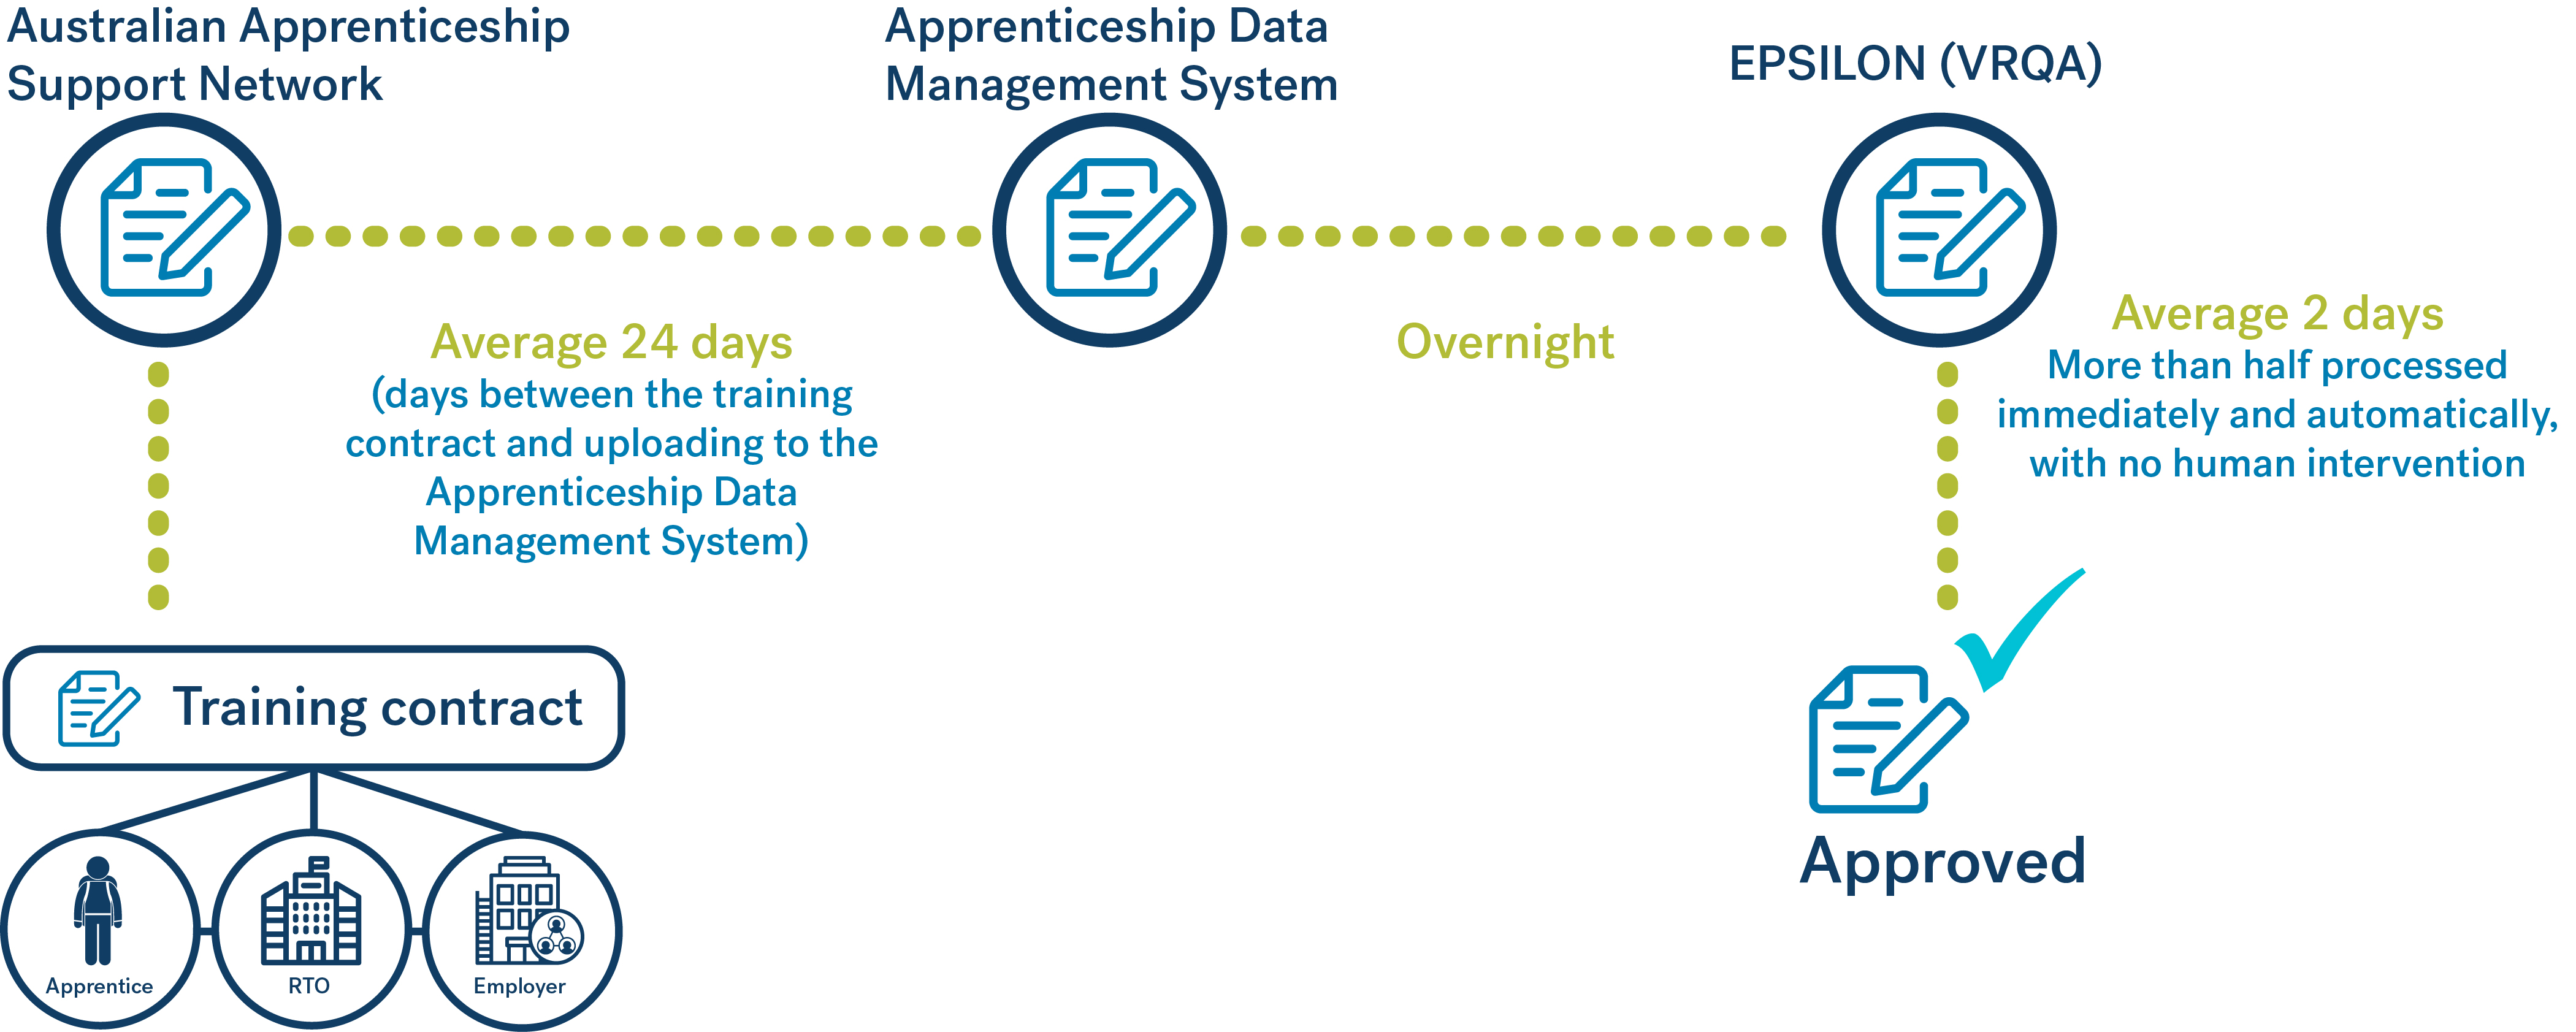 Diagram showing the process and time taken for approval of training contracts